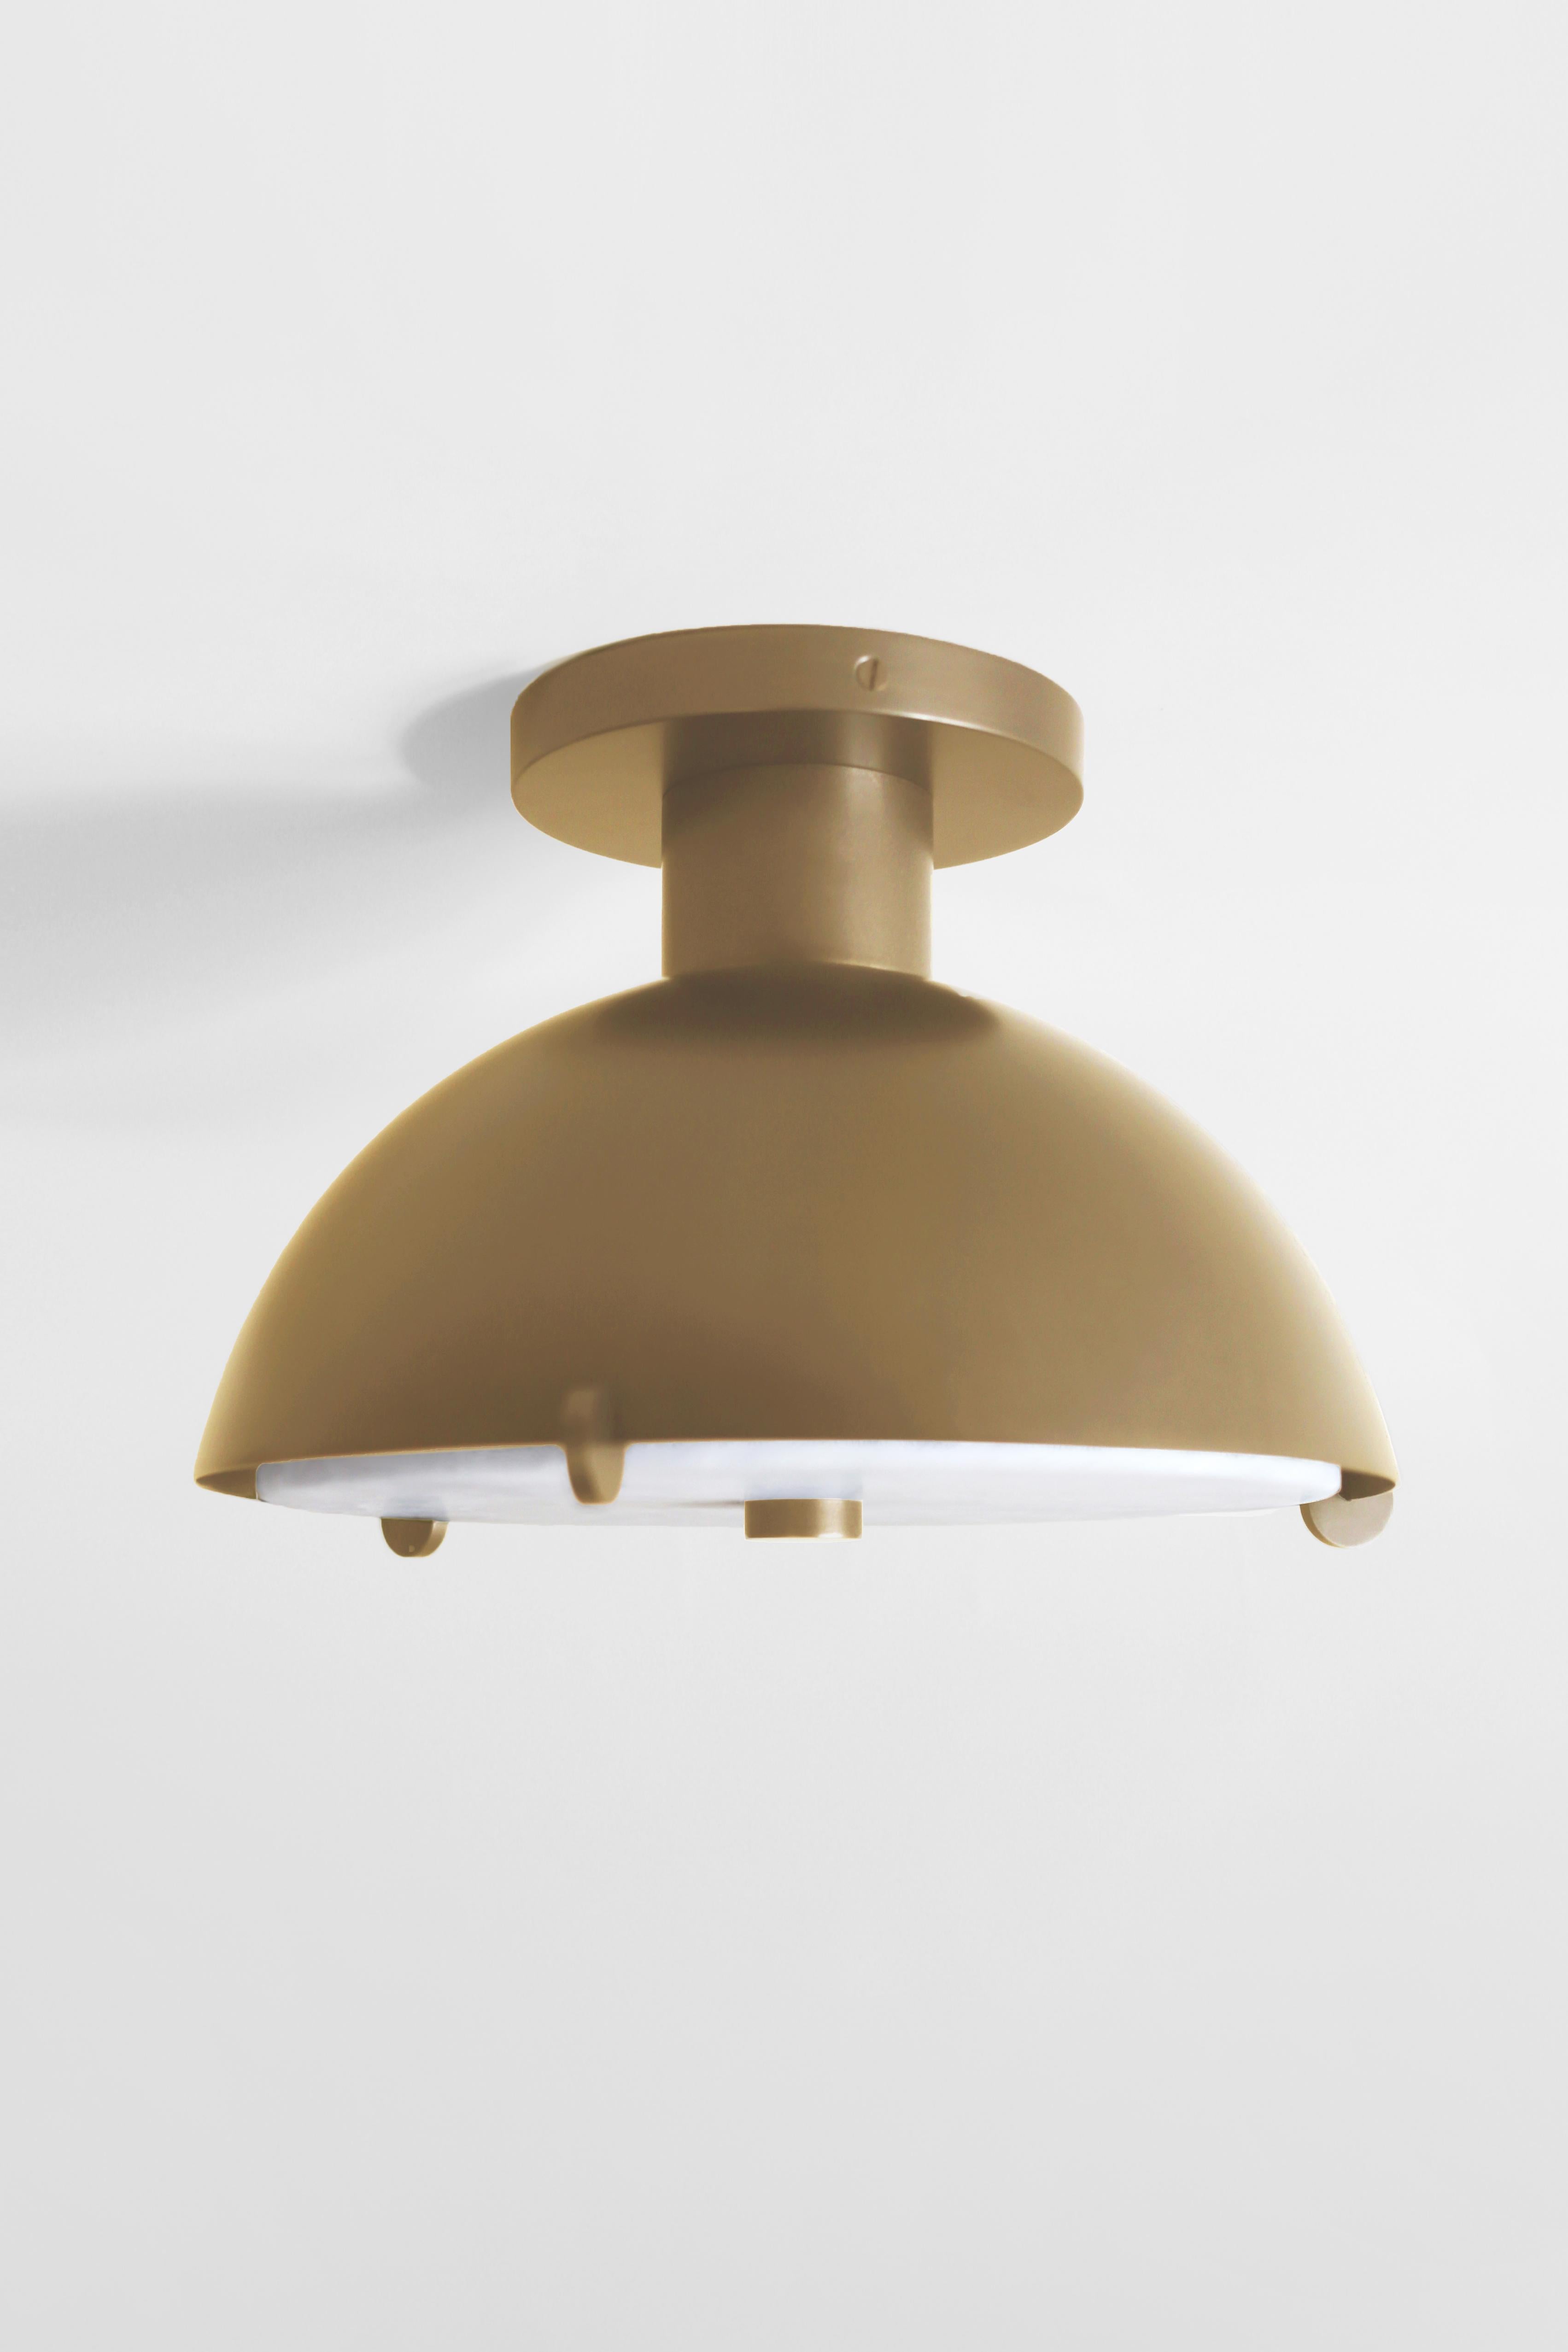 Orphan Work 001 Semi-Flush
Shown in brushed brass and alabaster
Available in brushed brass, brushed nickel or blackened brass
Measures: 7 1/2” height X 13” diameter
UL approved
Holds (1) 40W candelabra blub
must use LED bulb

Orphan Work is designed